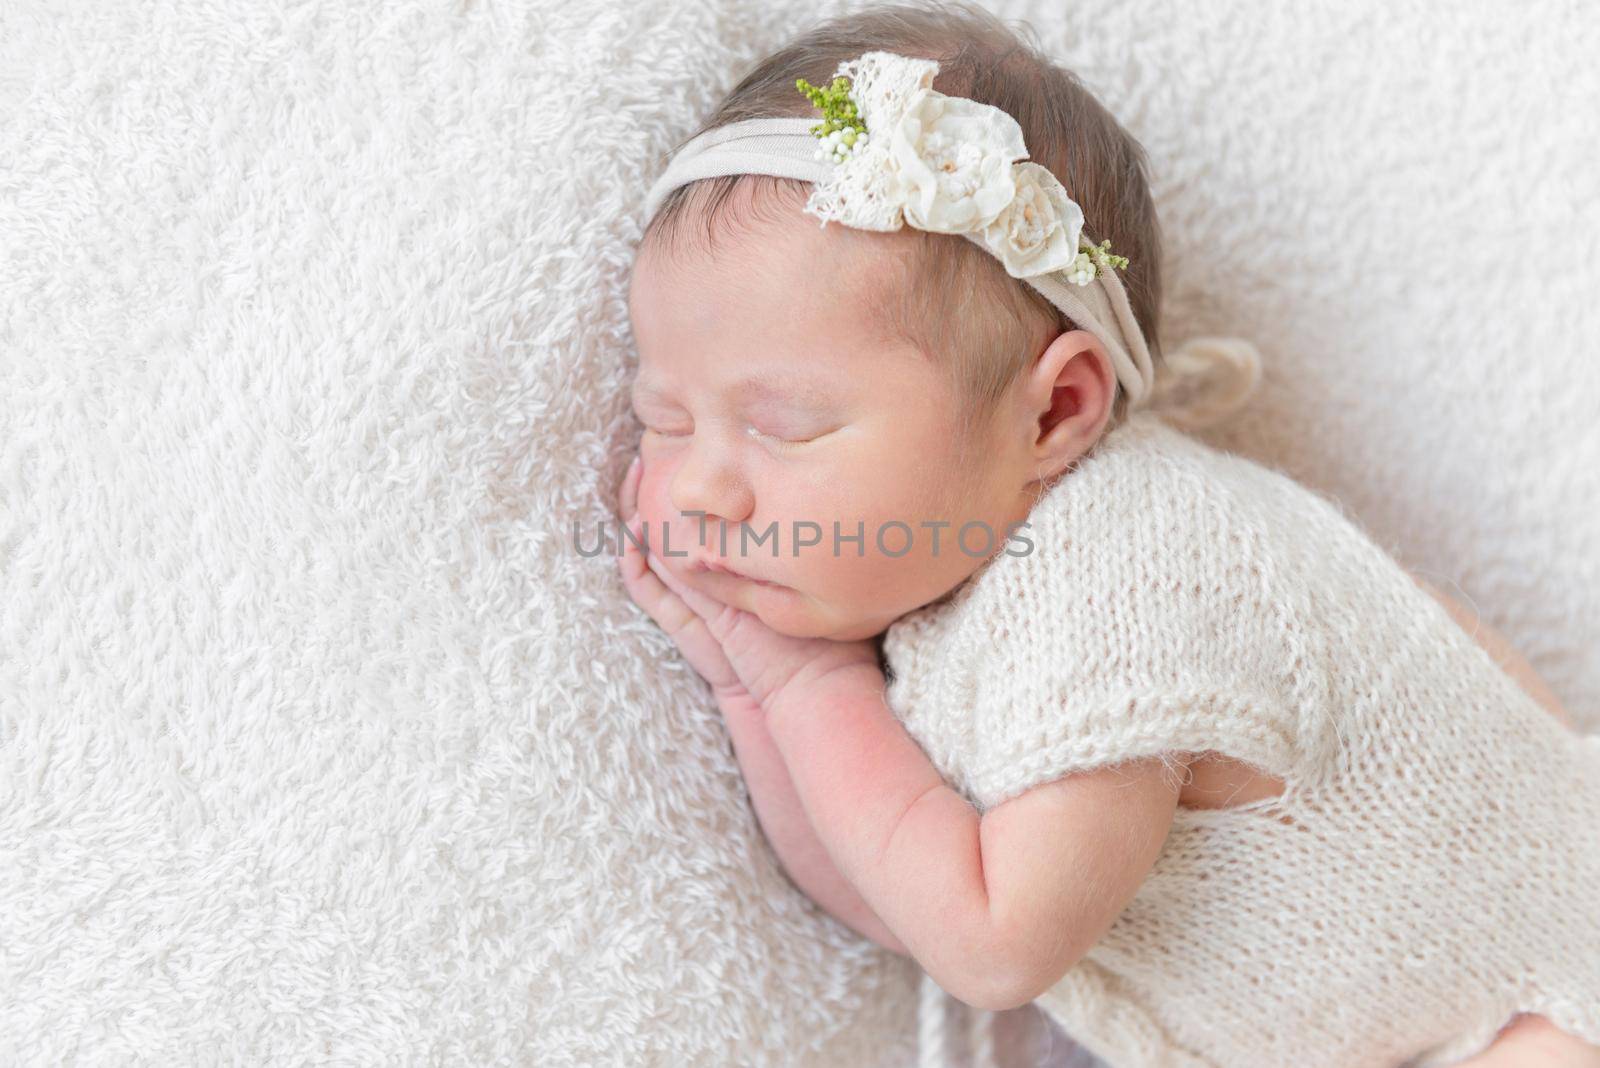 Lovely sleeping baby with a white hairband, dressed in white cute suit napping close-up